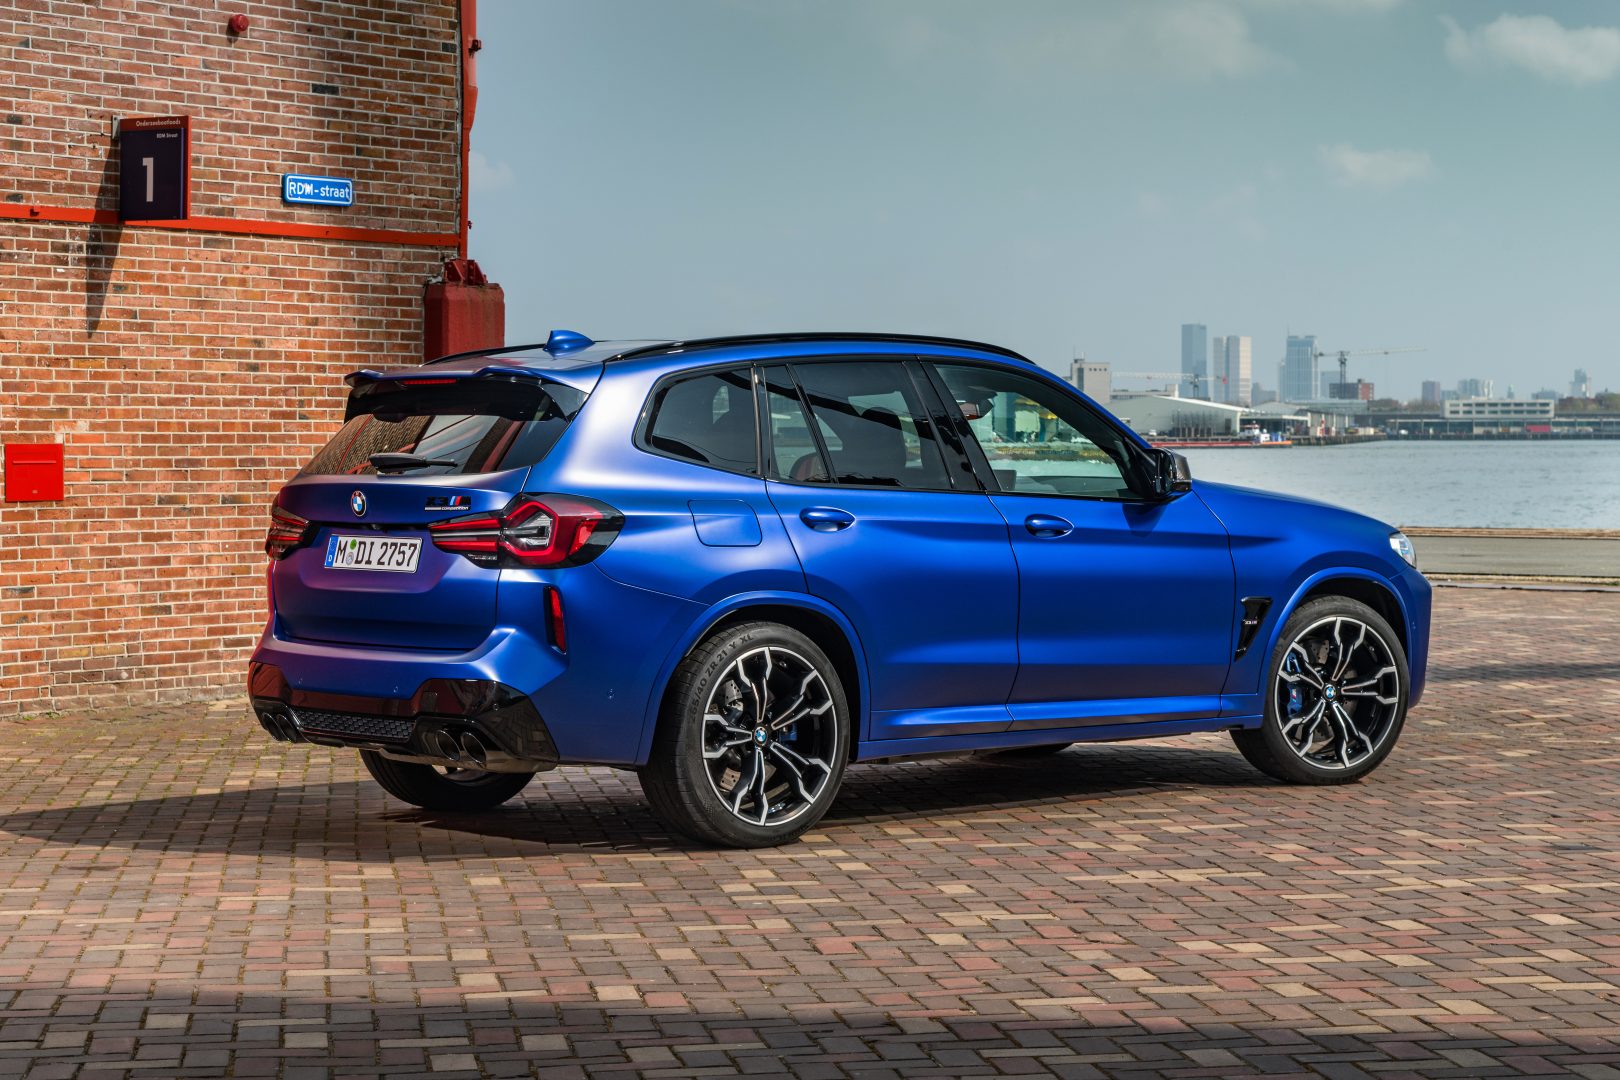 The 2022 BMW X3 M is revving up the experience for every driver